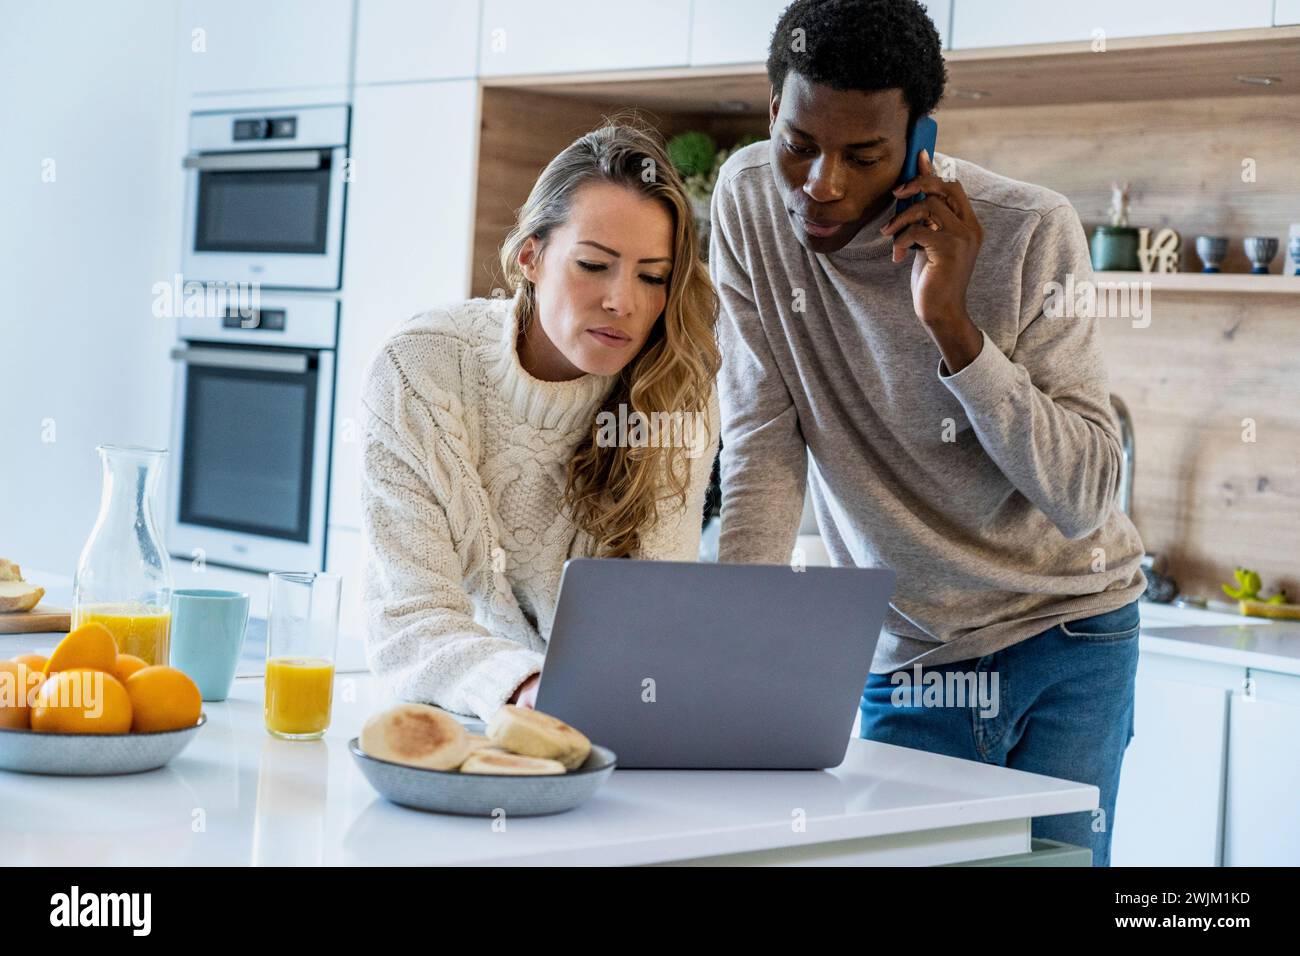 Adult couple using laptop while standing in kitchen Stock Photo